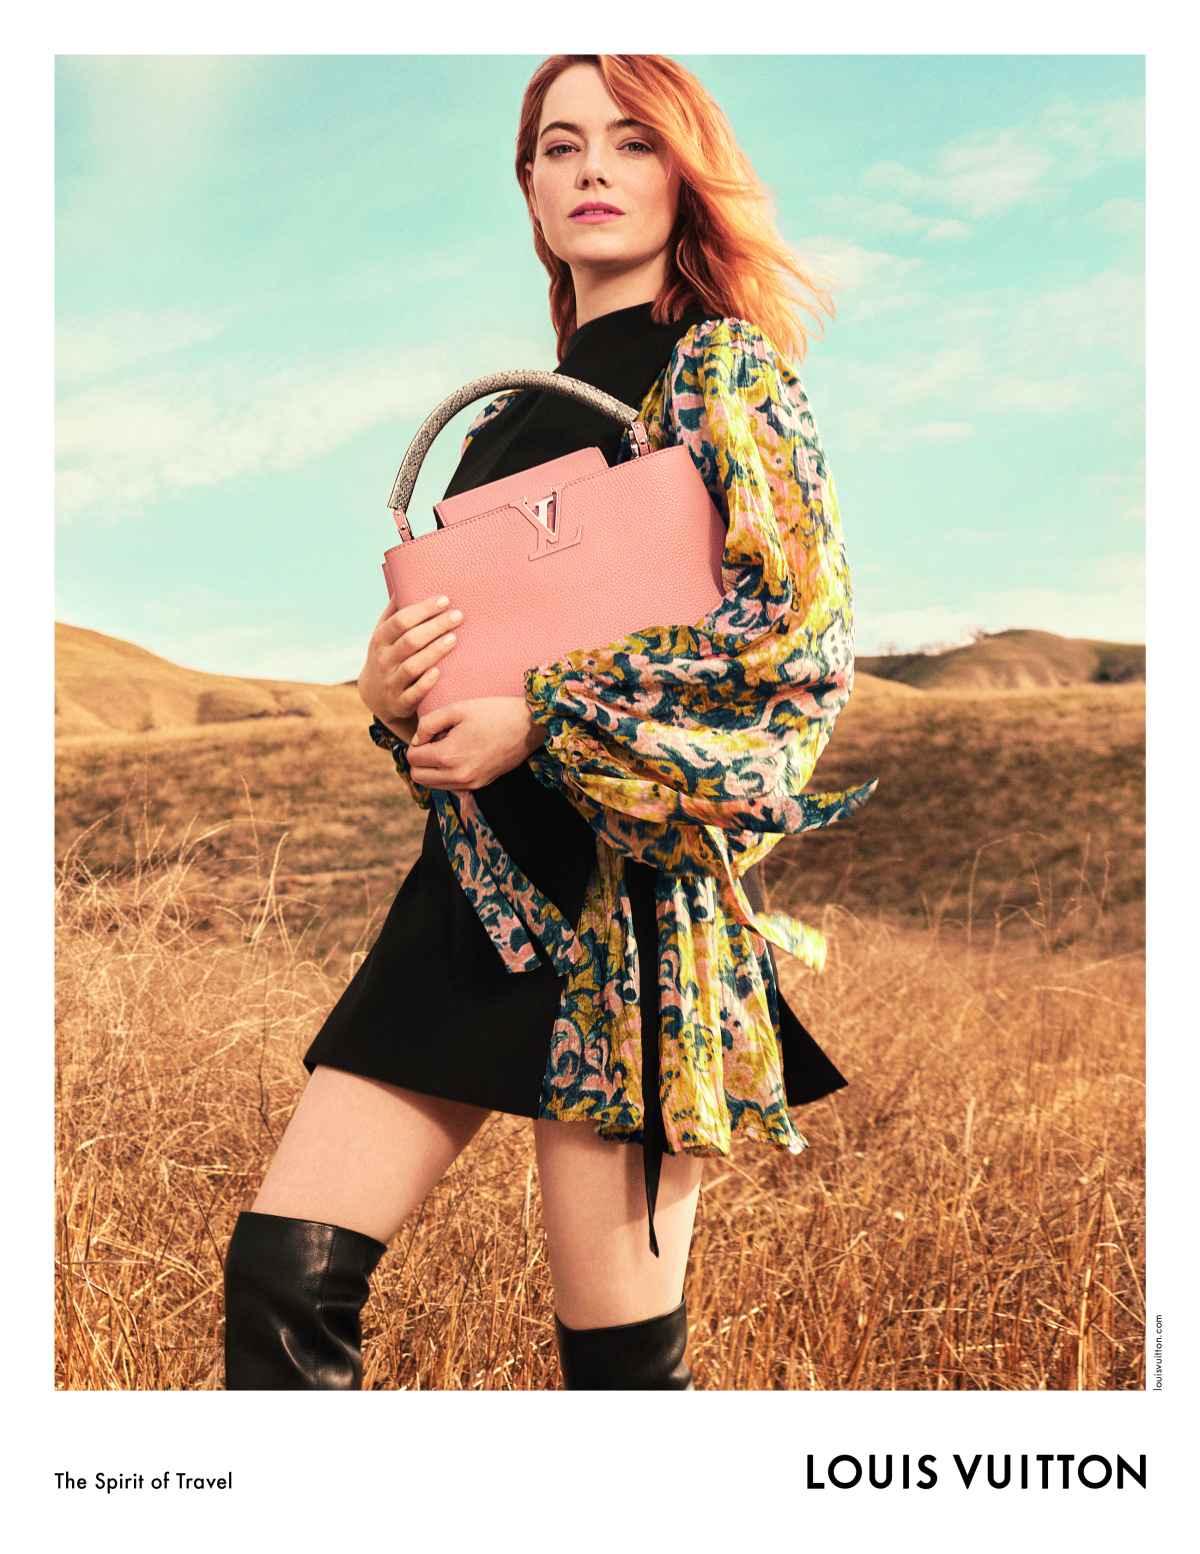 Emma Stone 2-pg clipping 2019 ad for Louis Vuitton